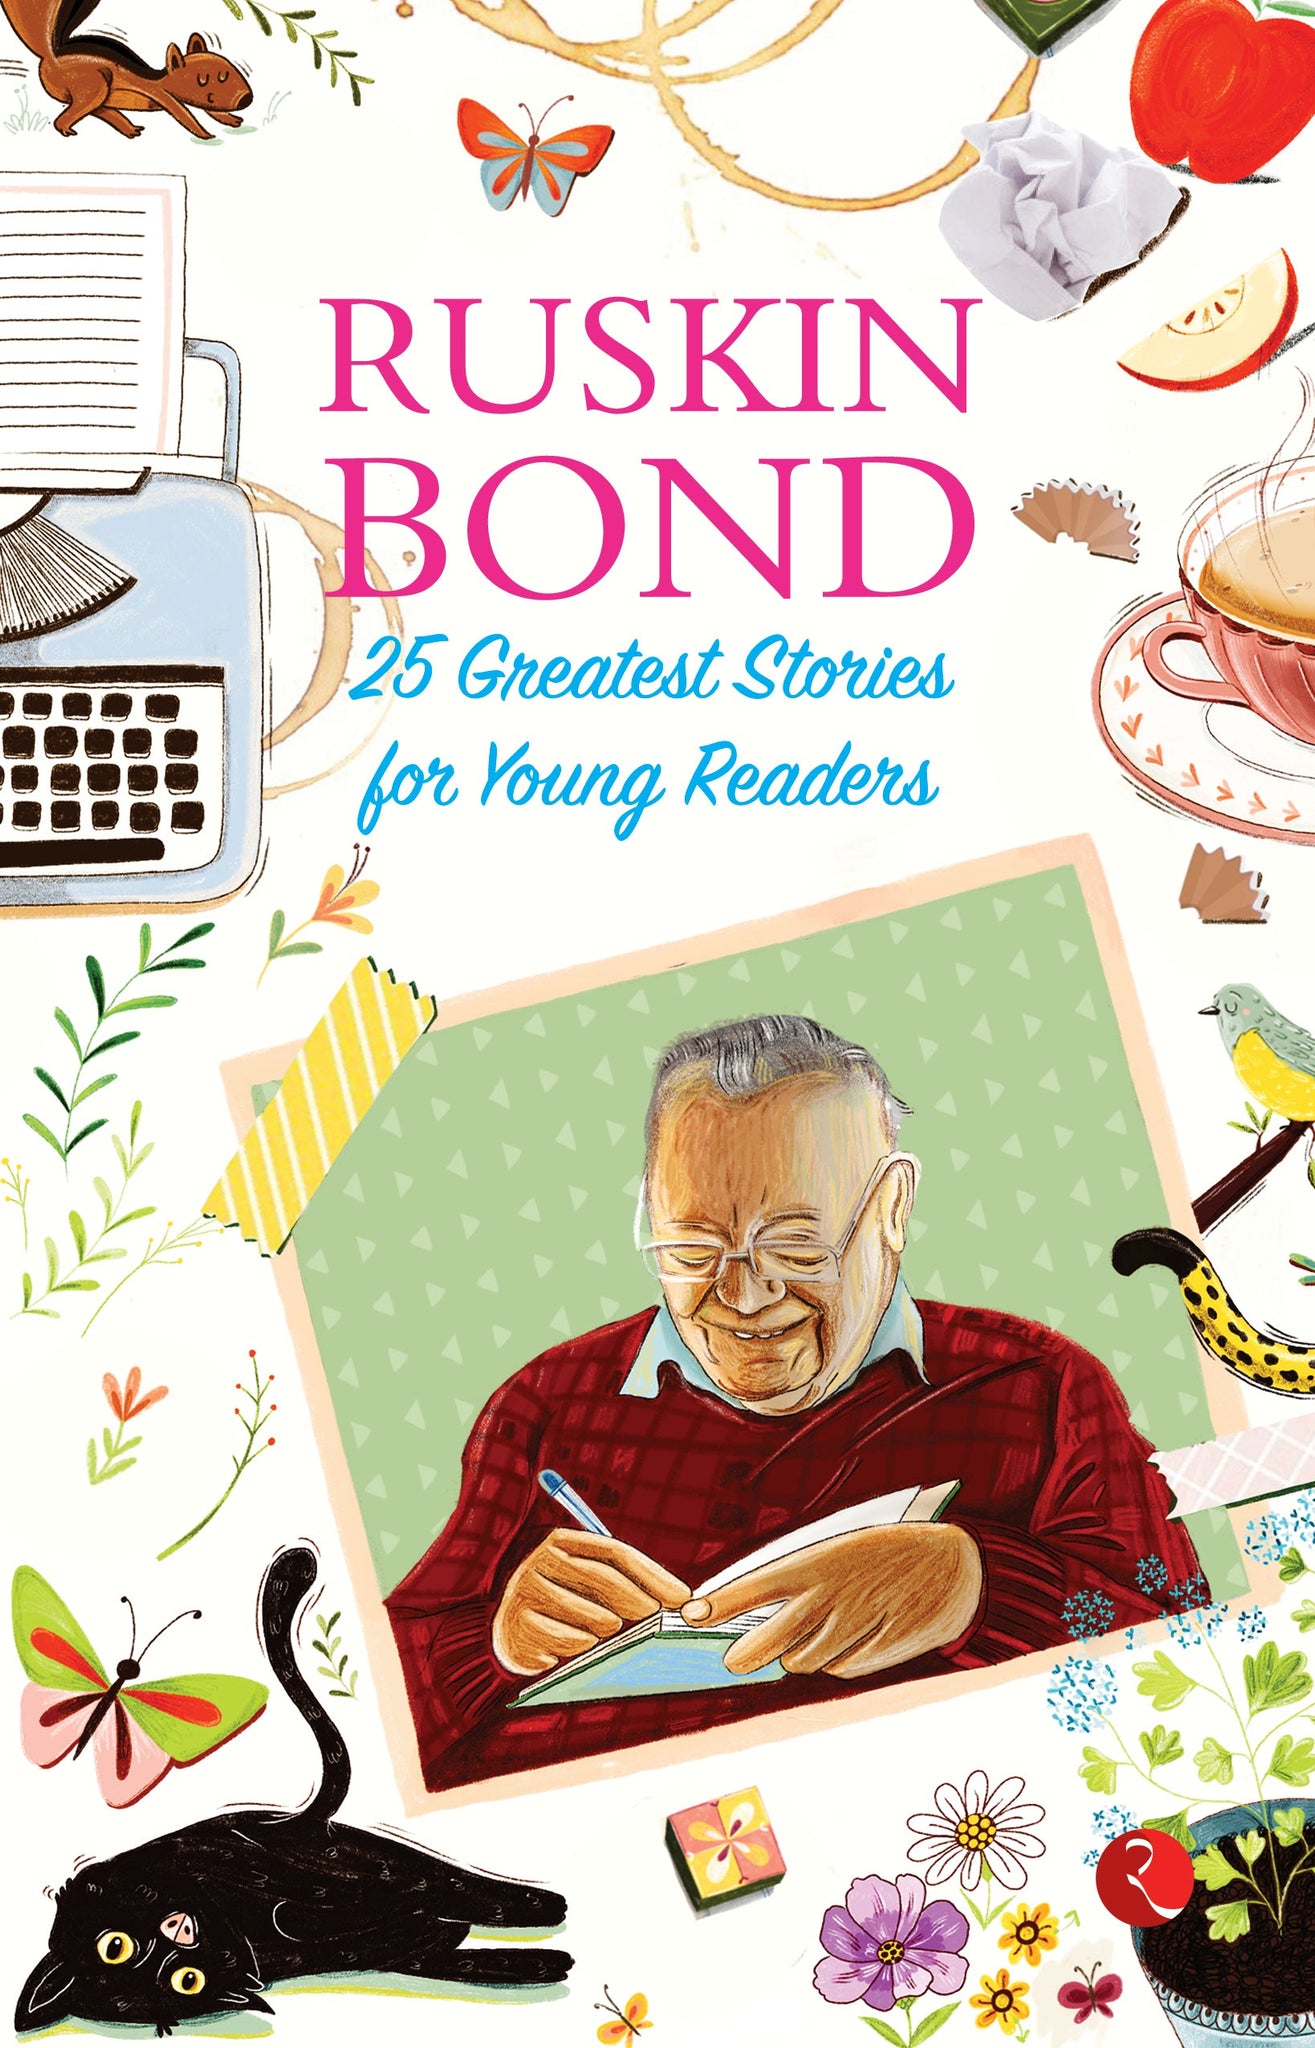 25 GREATEST STORIES FOR YOUNG READERS